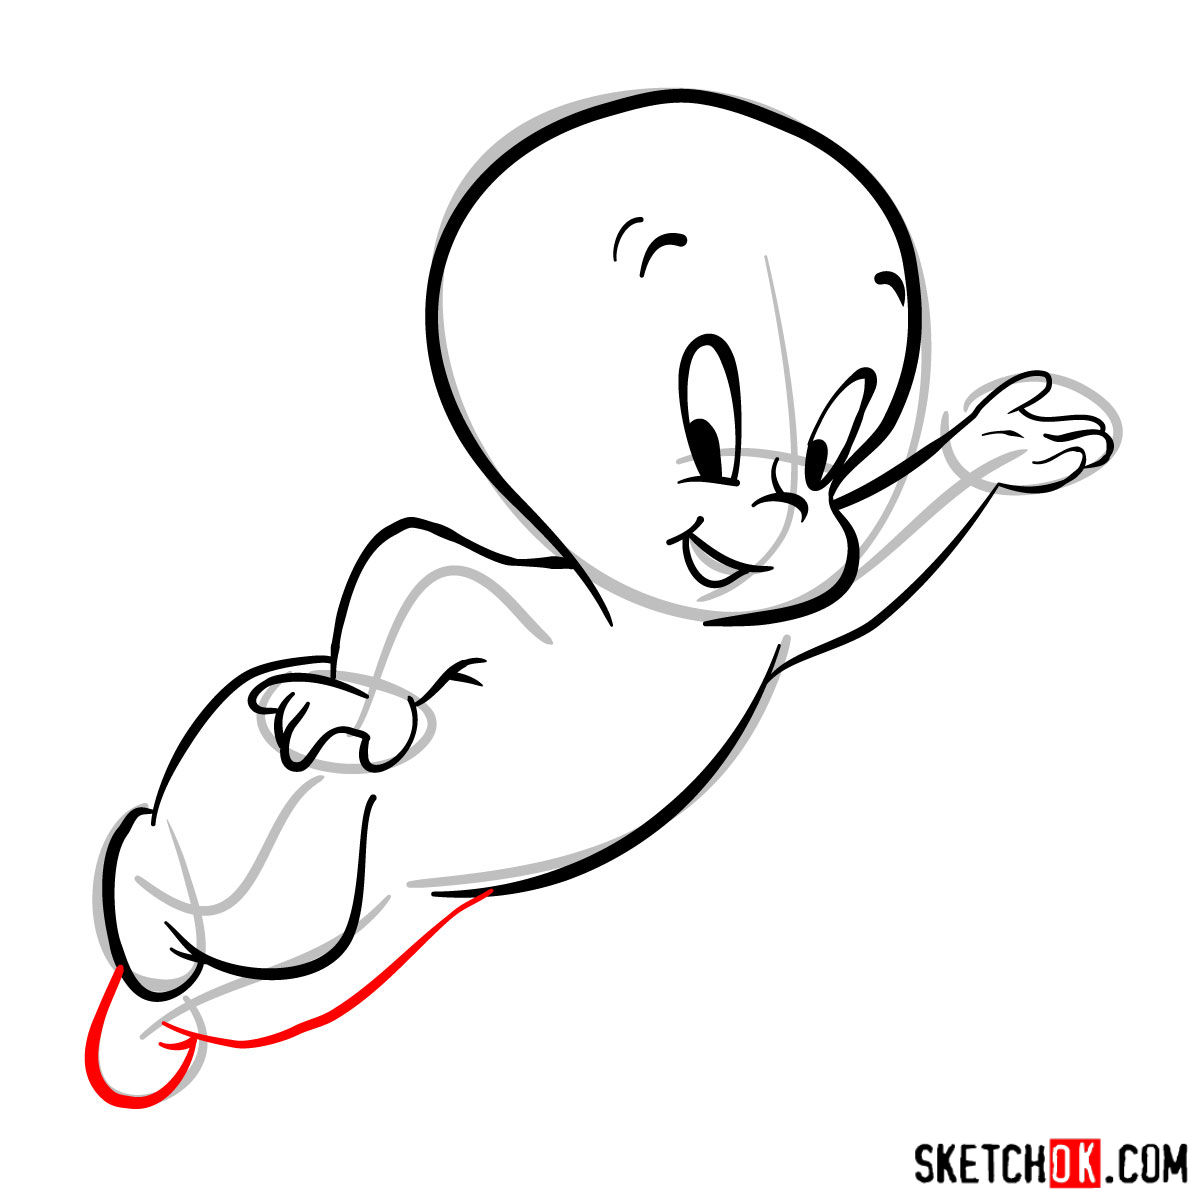 How to draw Casper the Friendly Ghost - step 09